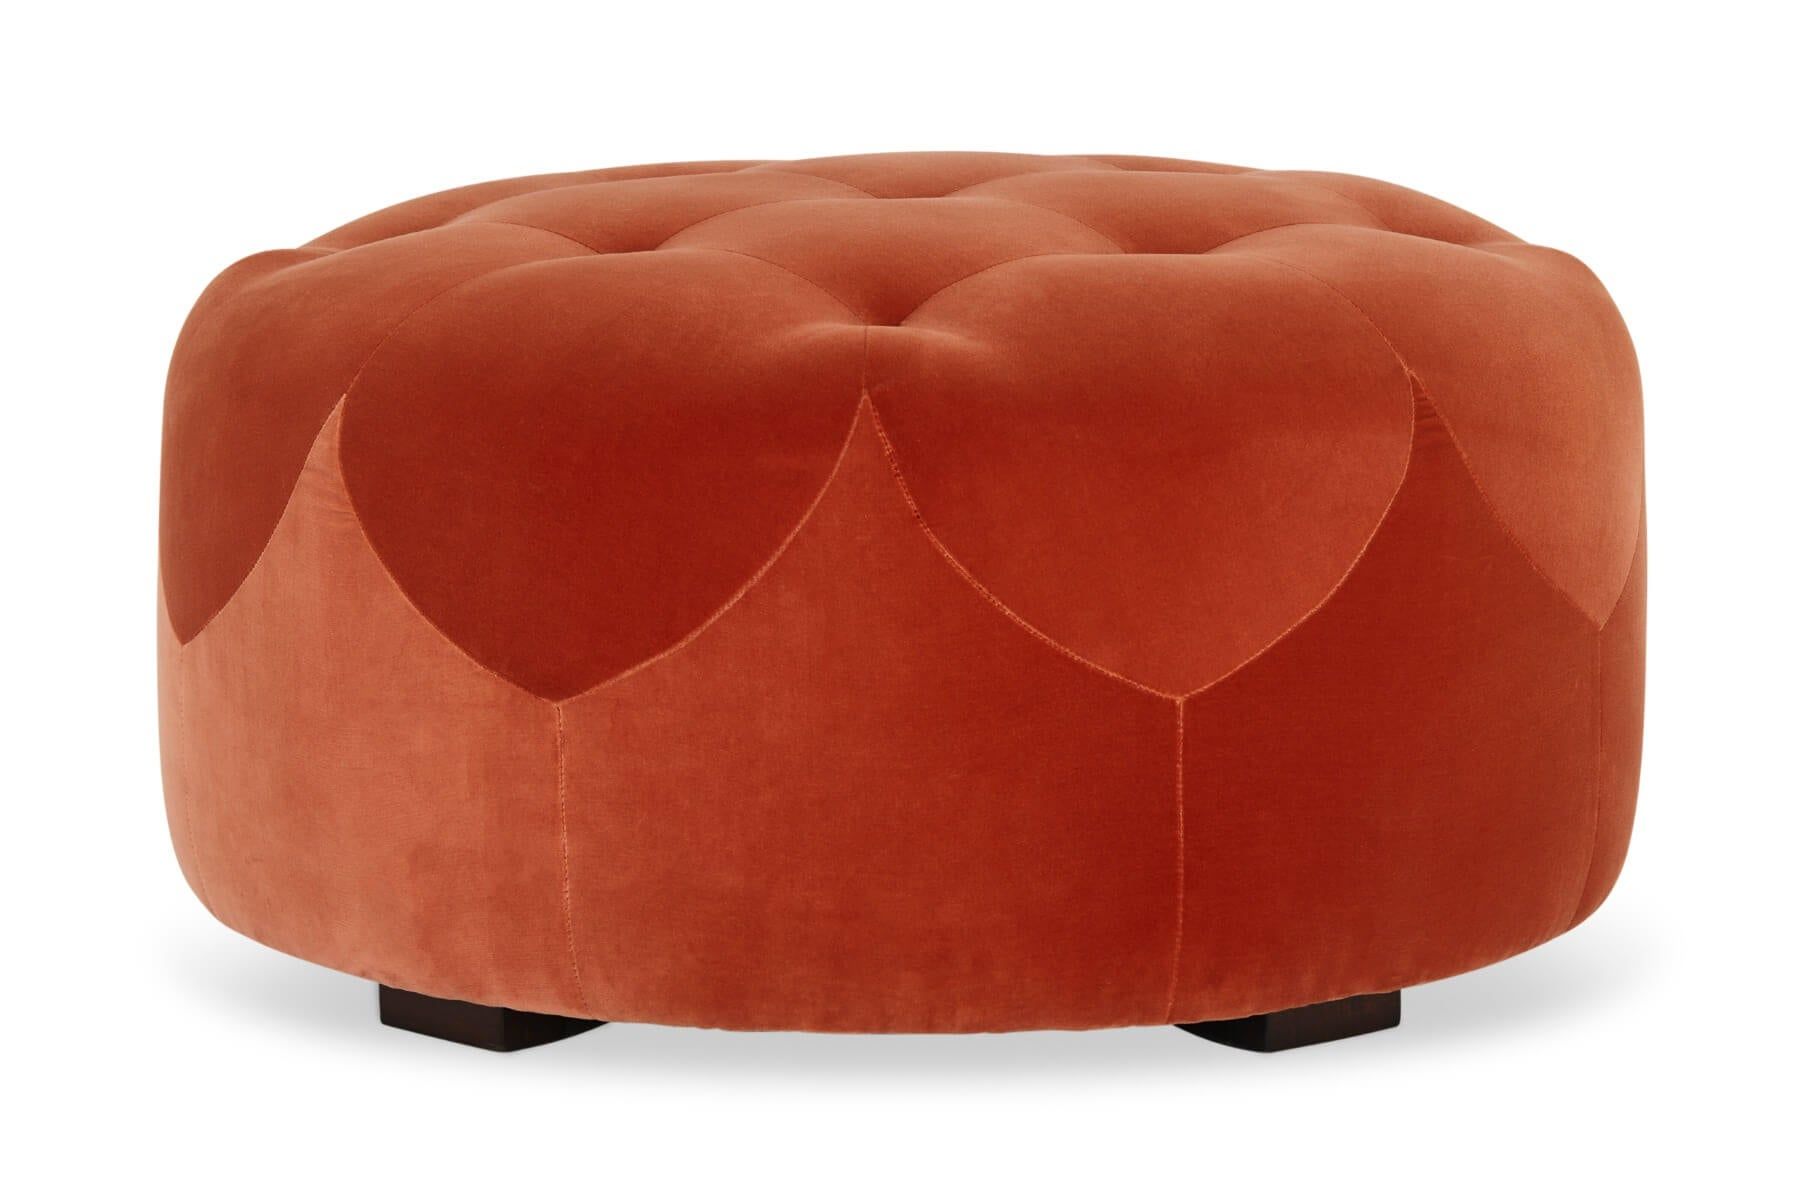 Featured Photo of 15 Best Collection of Orange Ottomans